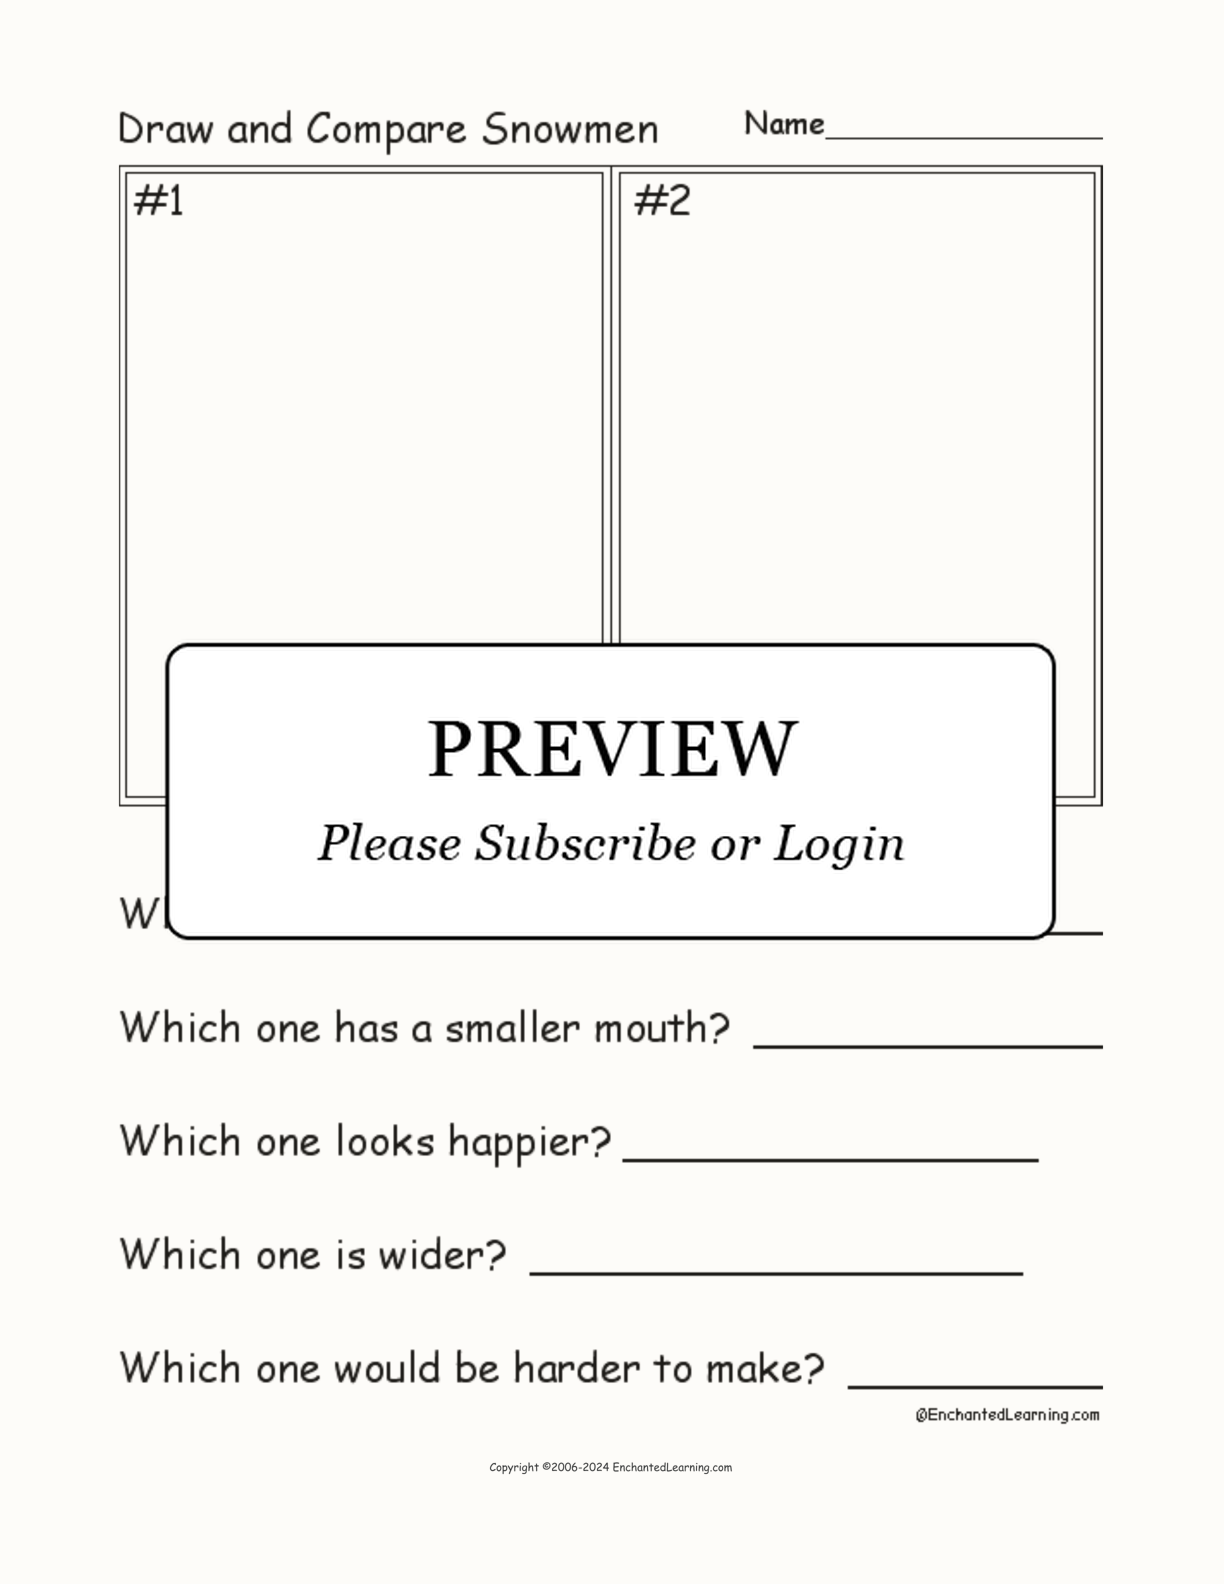 Draw and Compare Snowmen interactive worksheet page 1